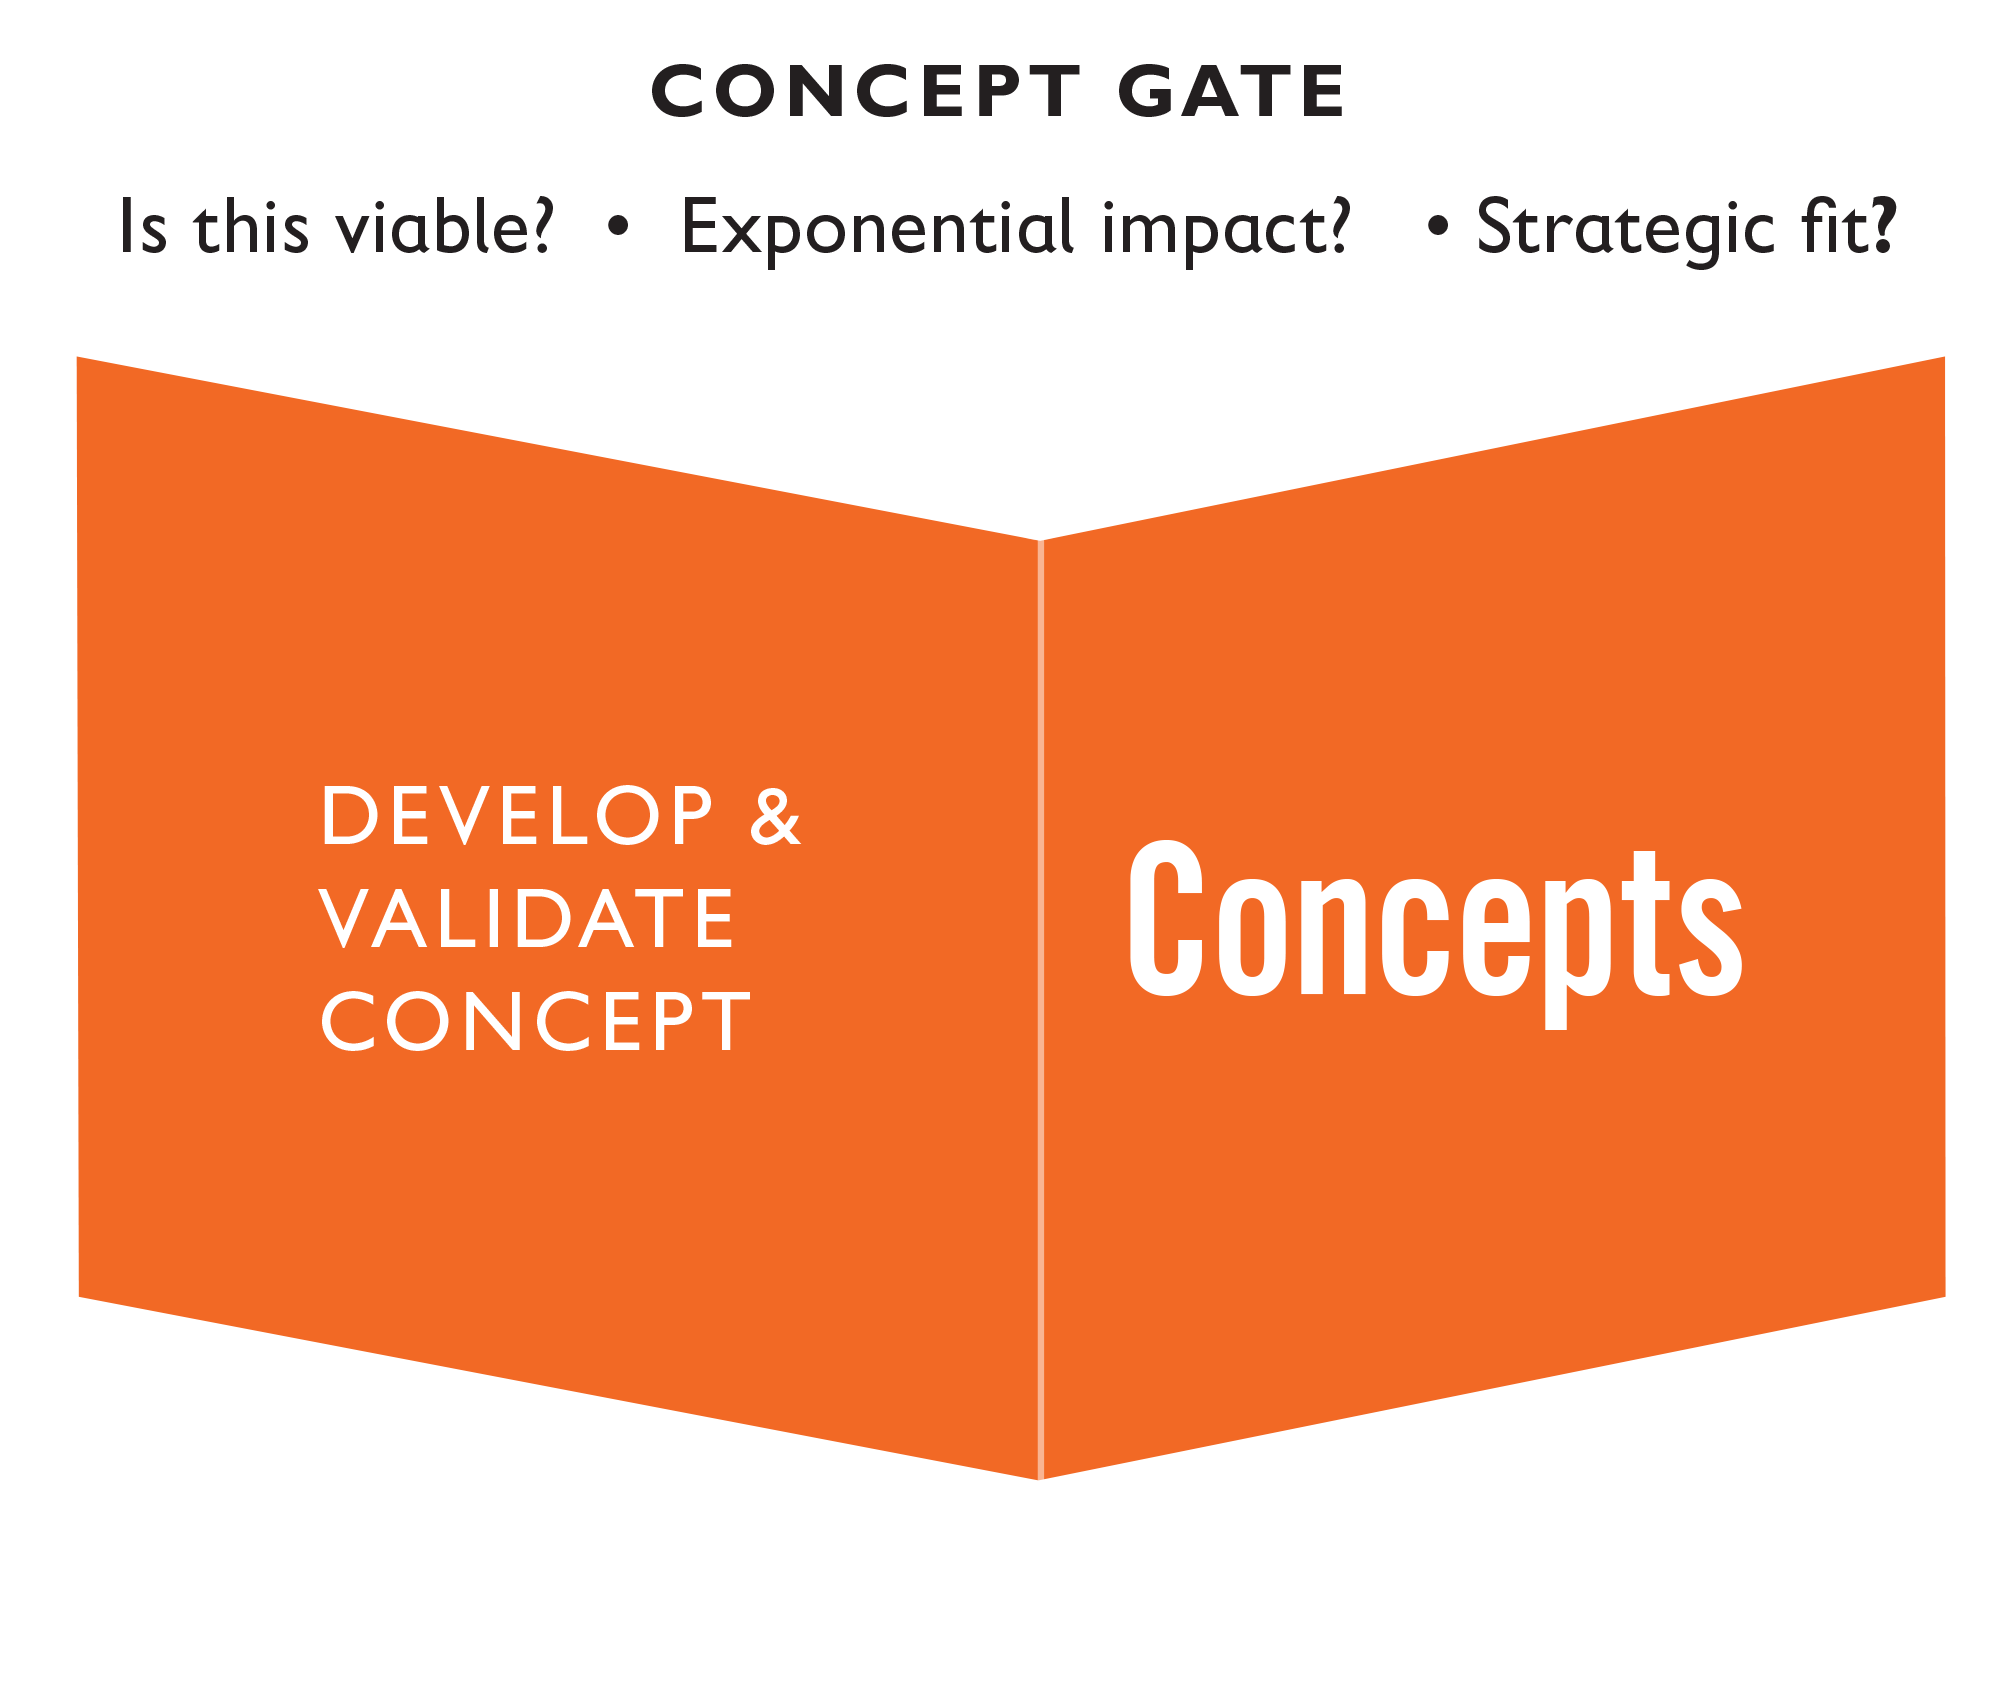 Concept gate: Experts develop and validate concepts, asking critical questions such as is this viable? Is there exponential impact? Does this fit strategically?